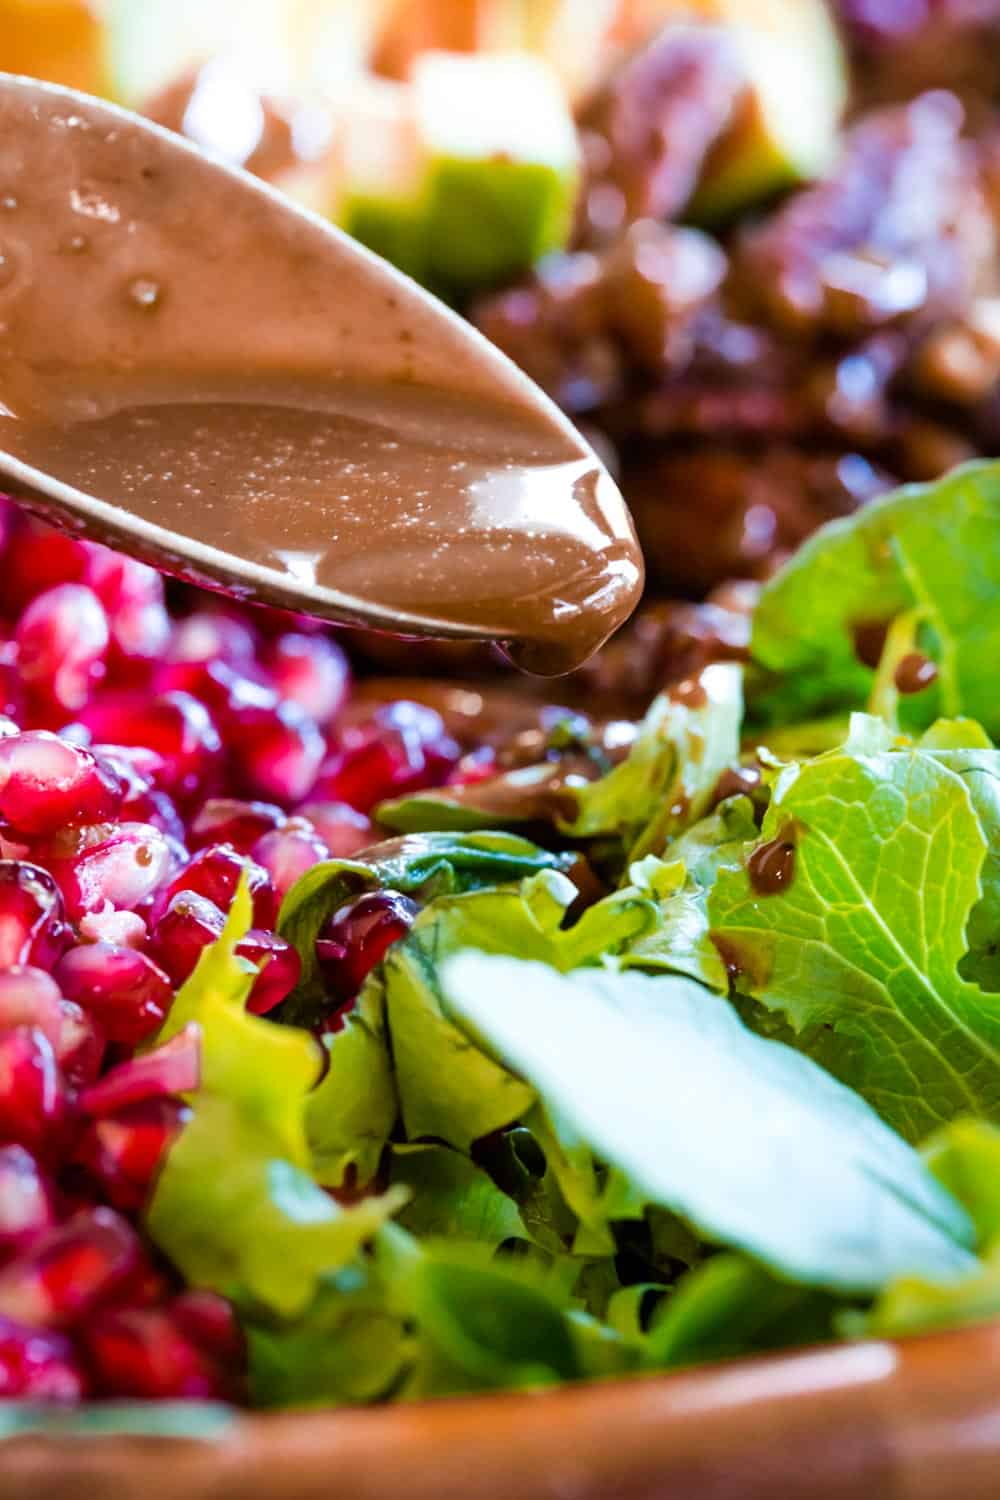 Drizzling the cranberry vinaigrette off a spoon onto a salad.